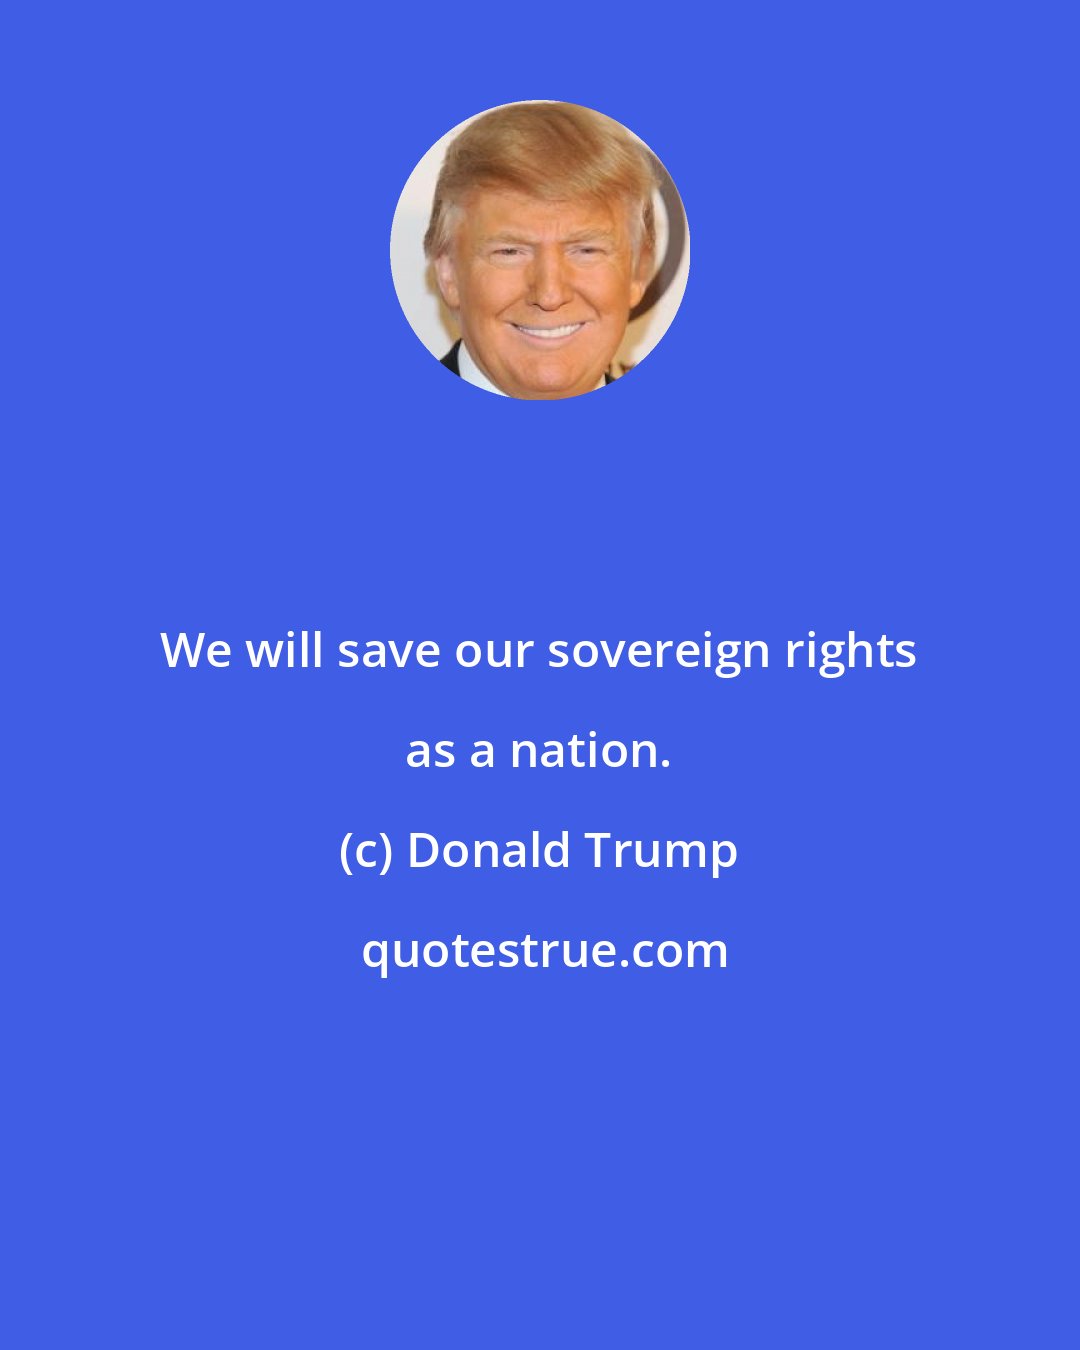 Donald Trump: We will save our sovereign rights as a nation.